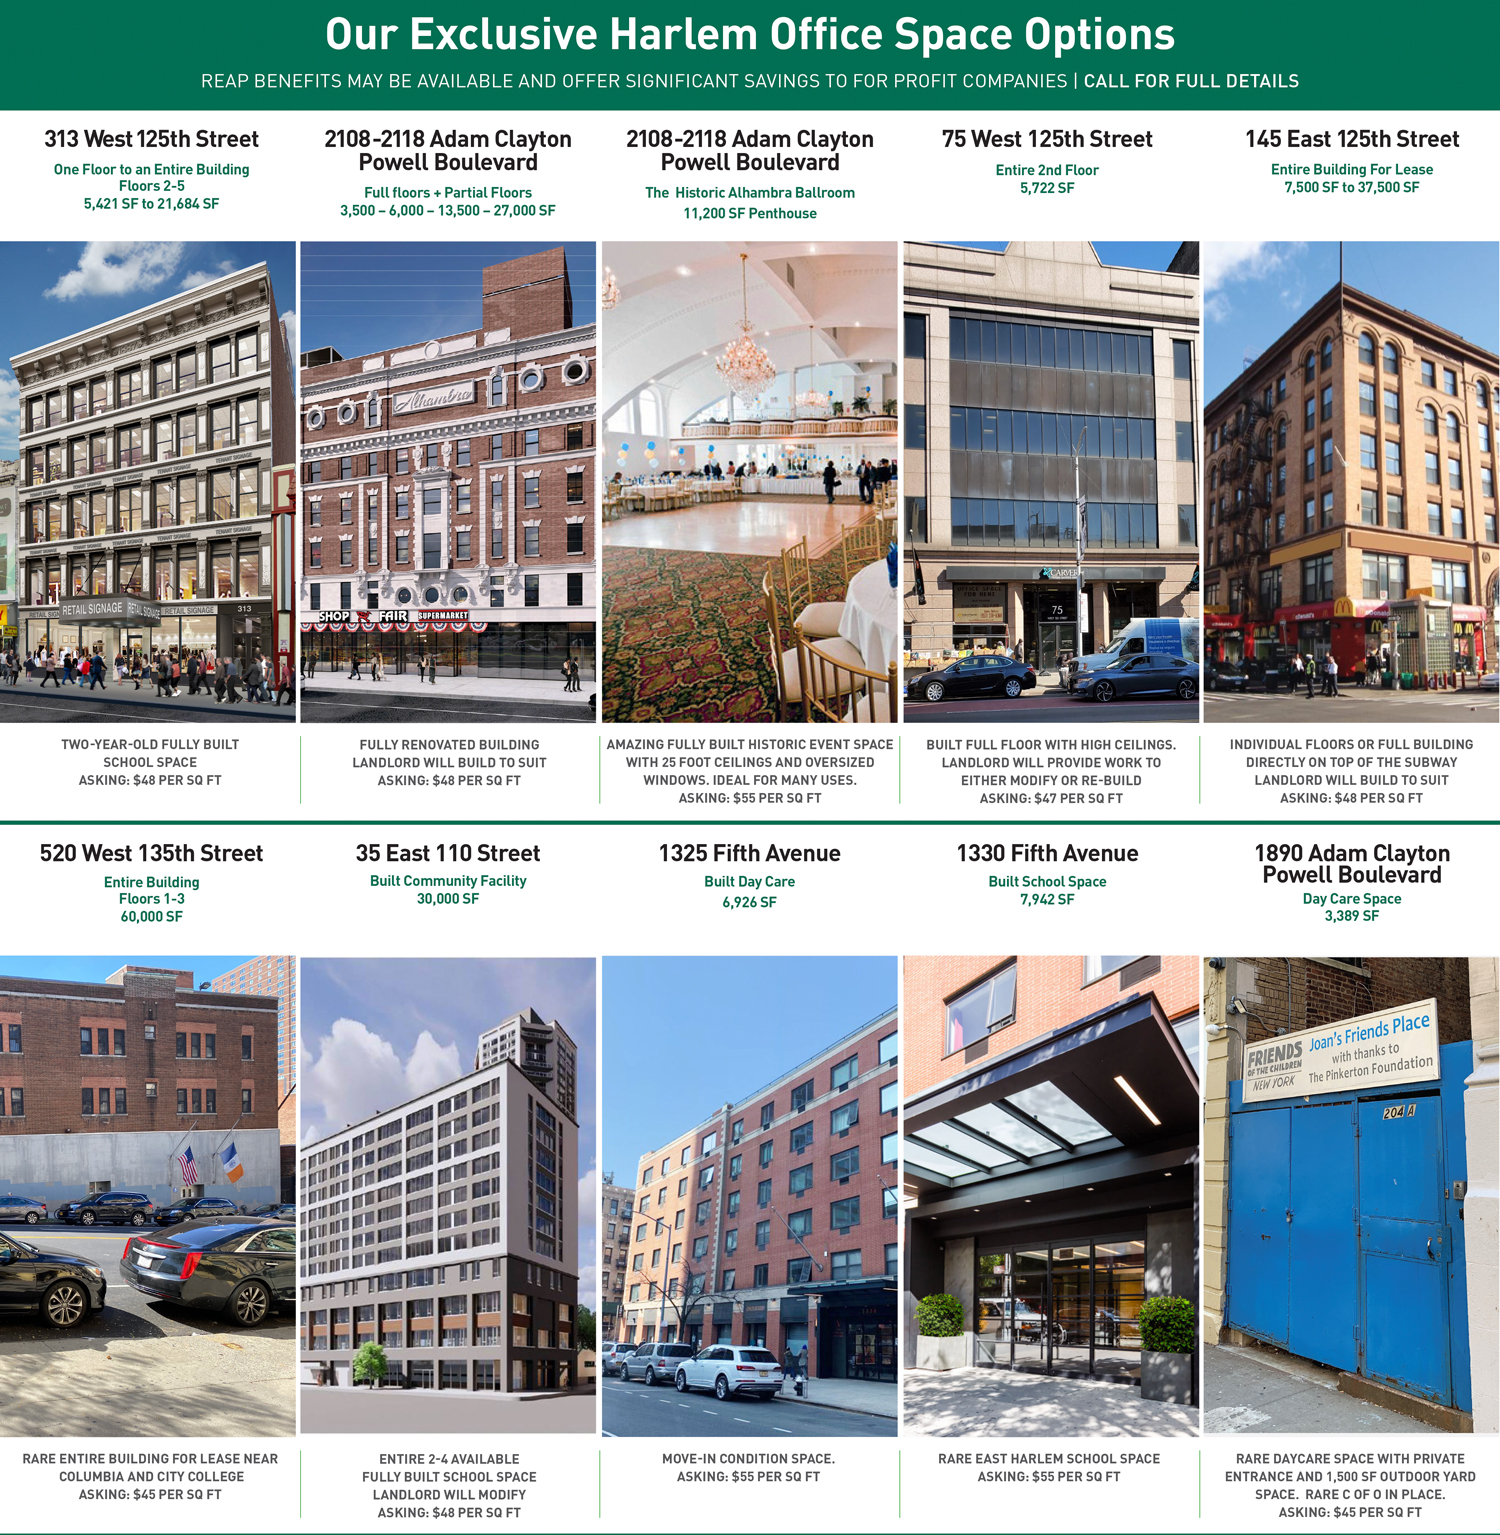 Our Exclusive Harlem Office Space Options